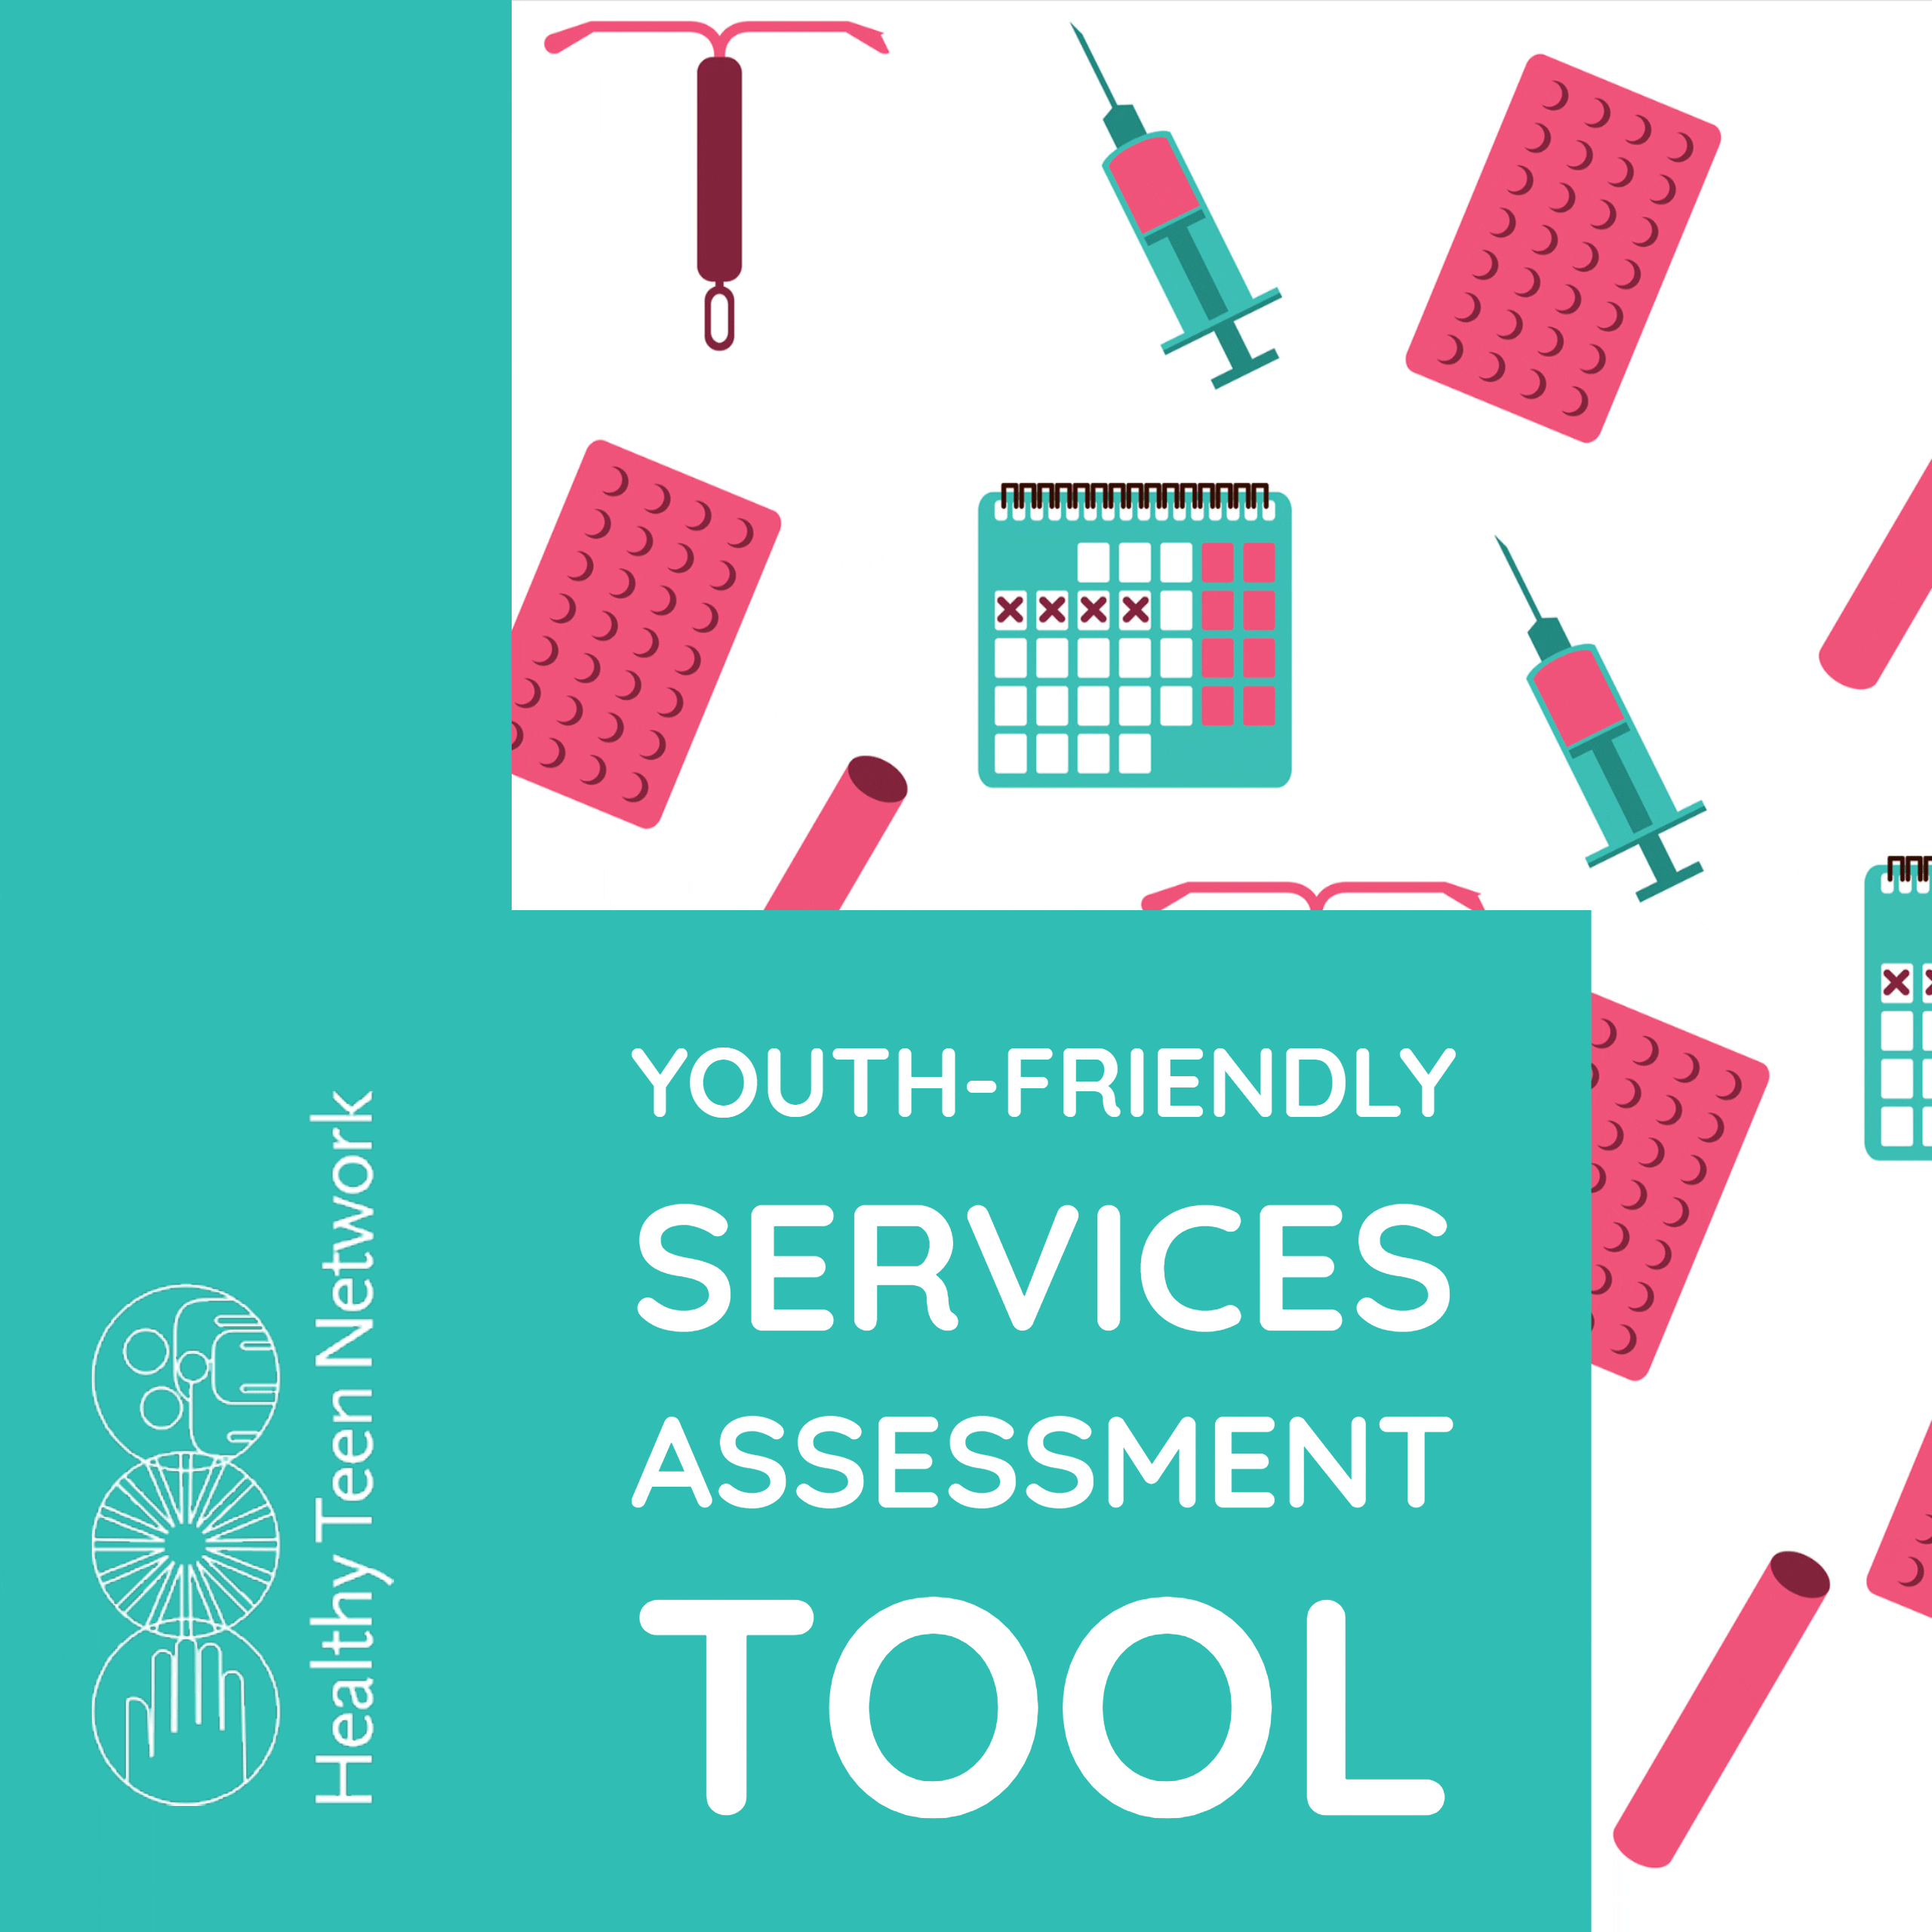 Cover image for youth-friendly services assessment tool